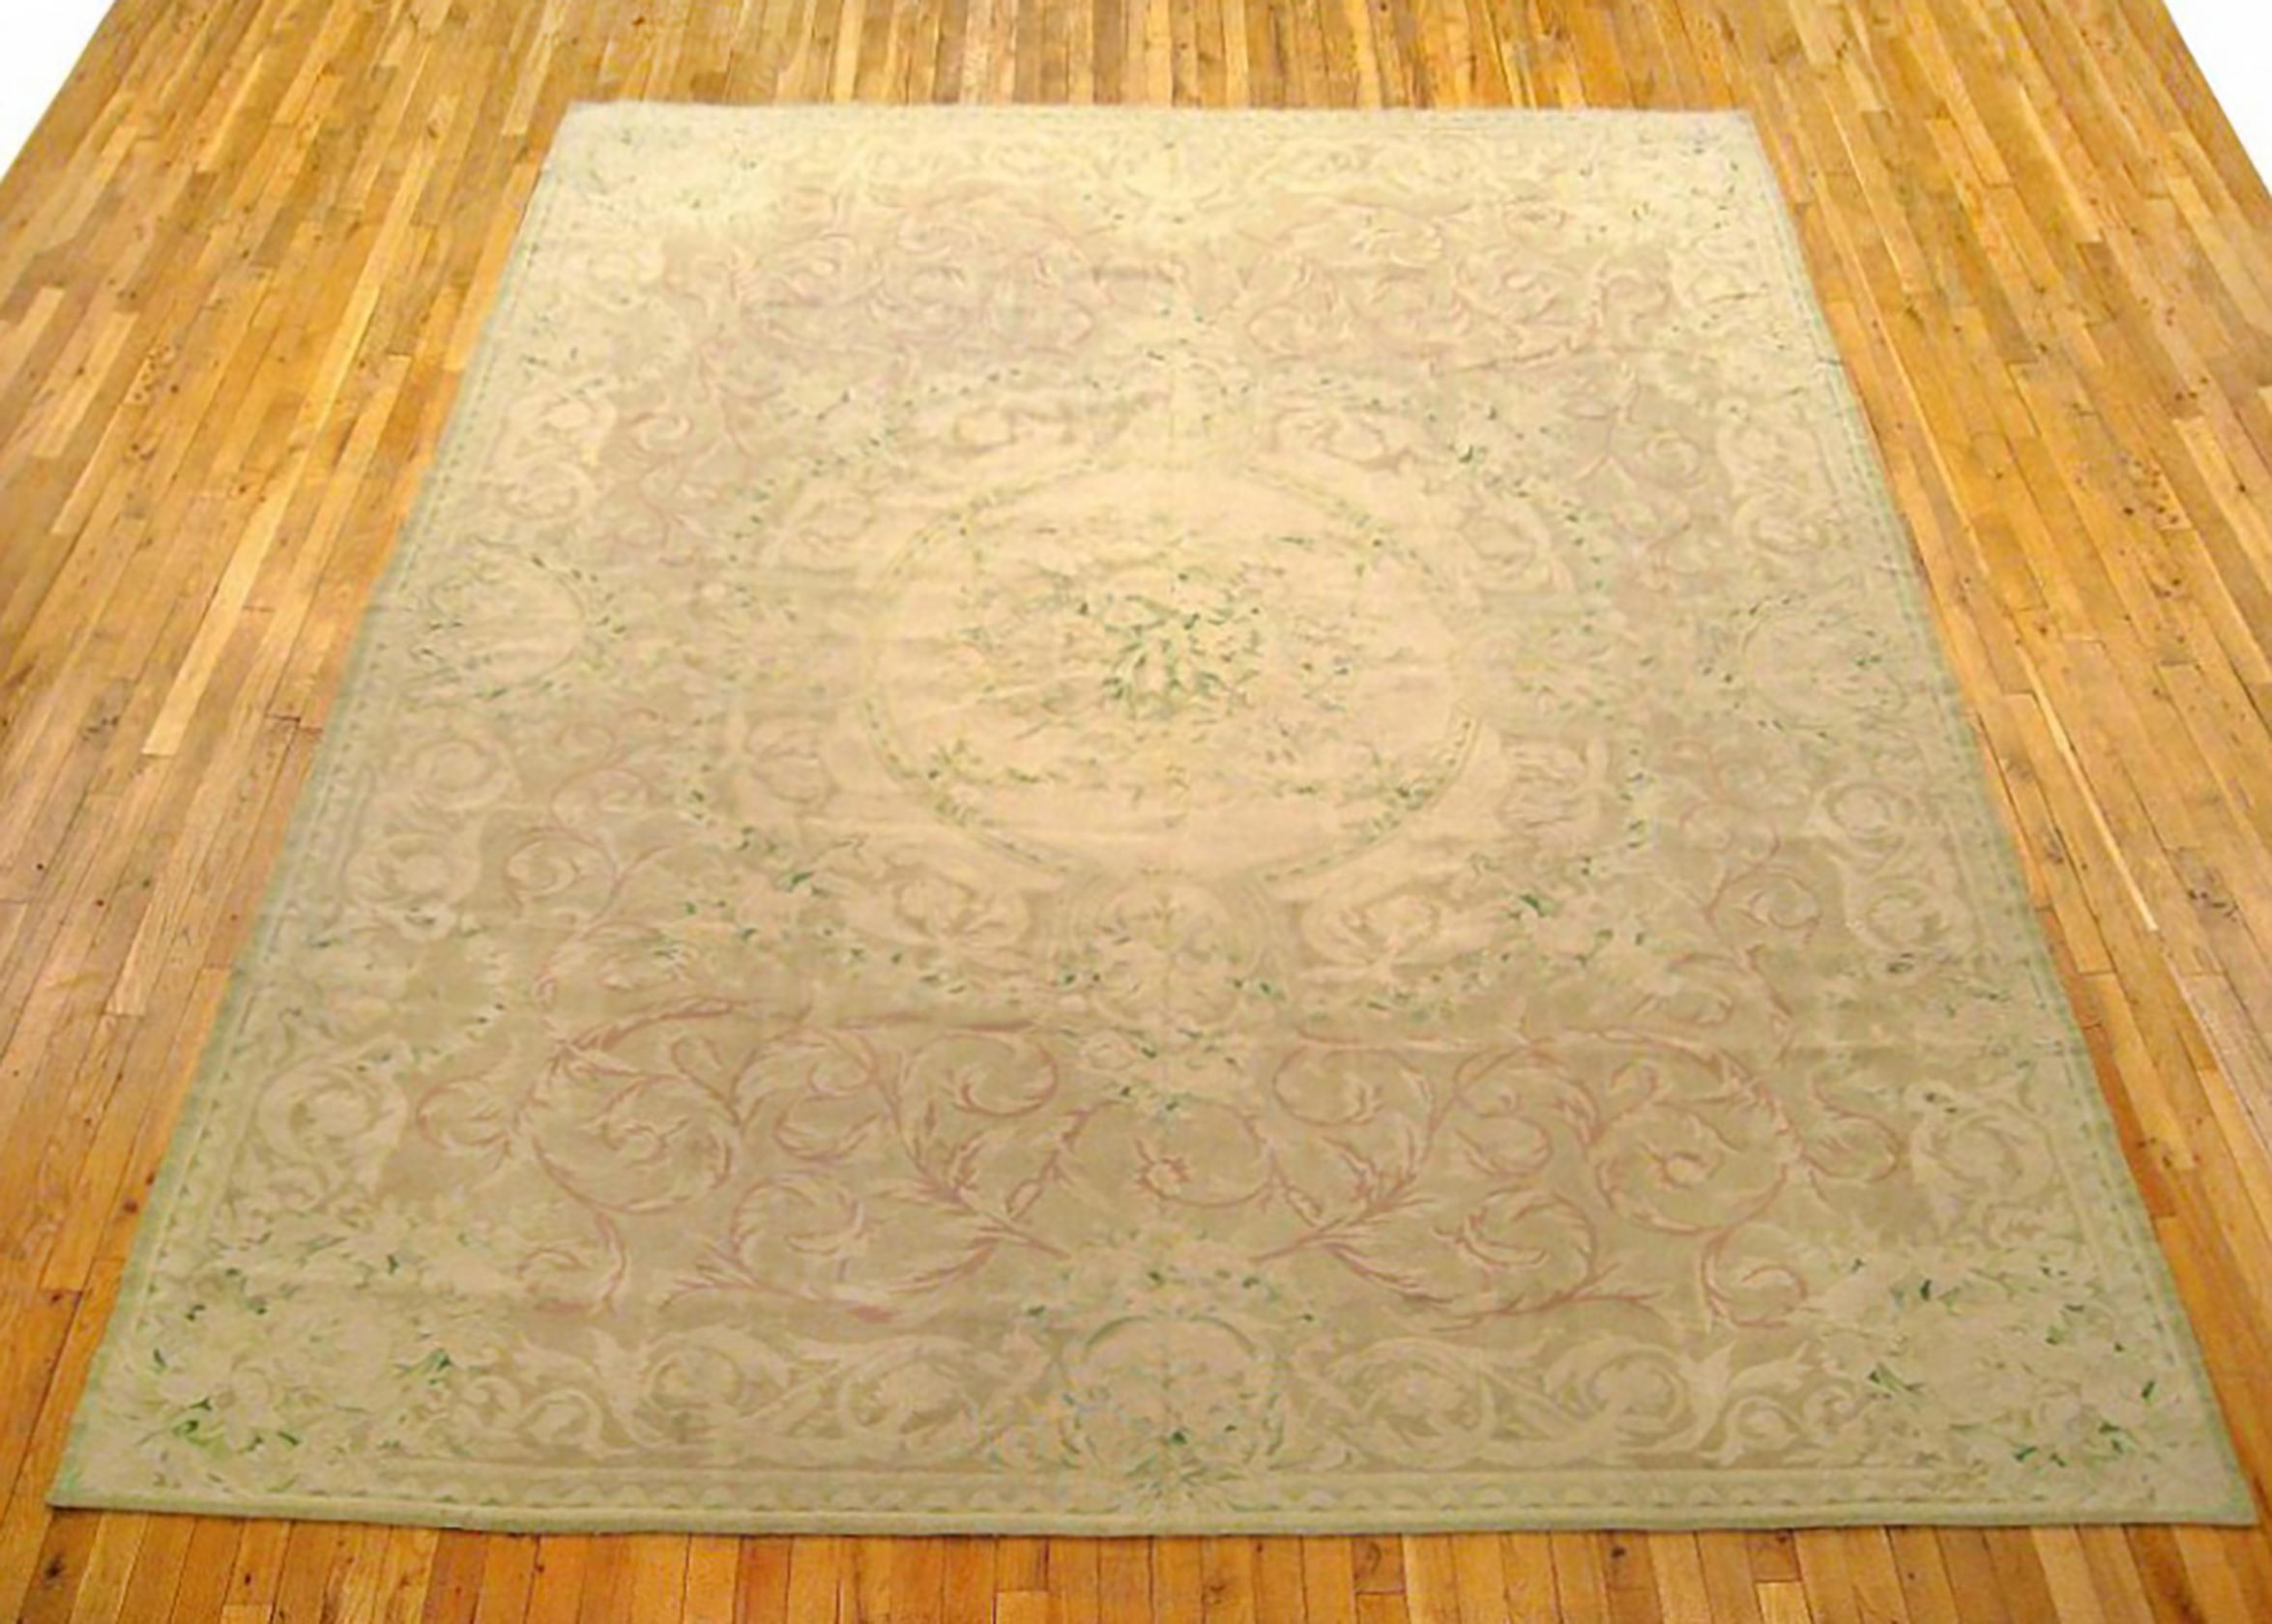 Antique French Aubusson Rug, Room size, circa 1910

A one-of-a-kind antique French Aubusson Carpet, hand-knotted with soft wool pile. Featuring a central medallion on the soft red primary field, with a delicate ivory outer border. decorated with